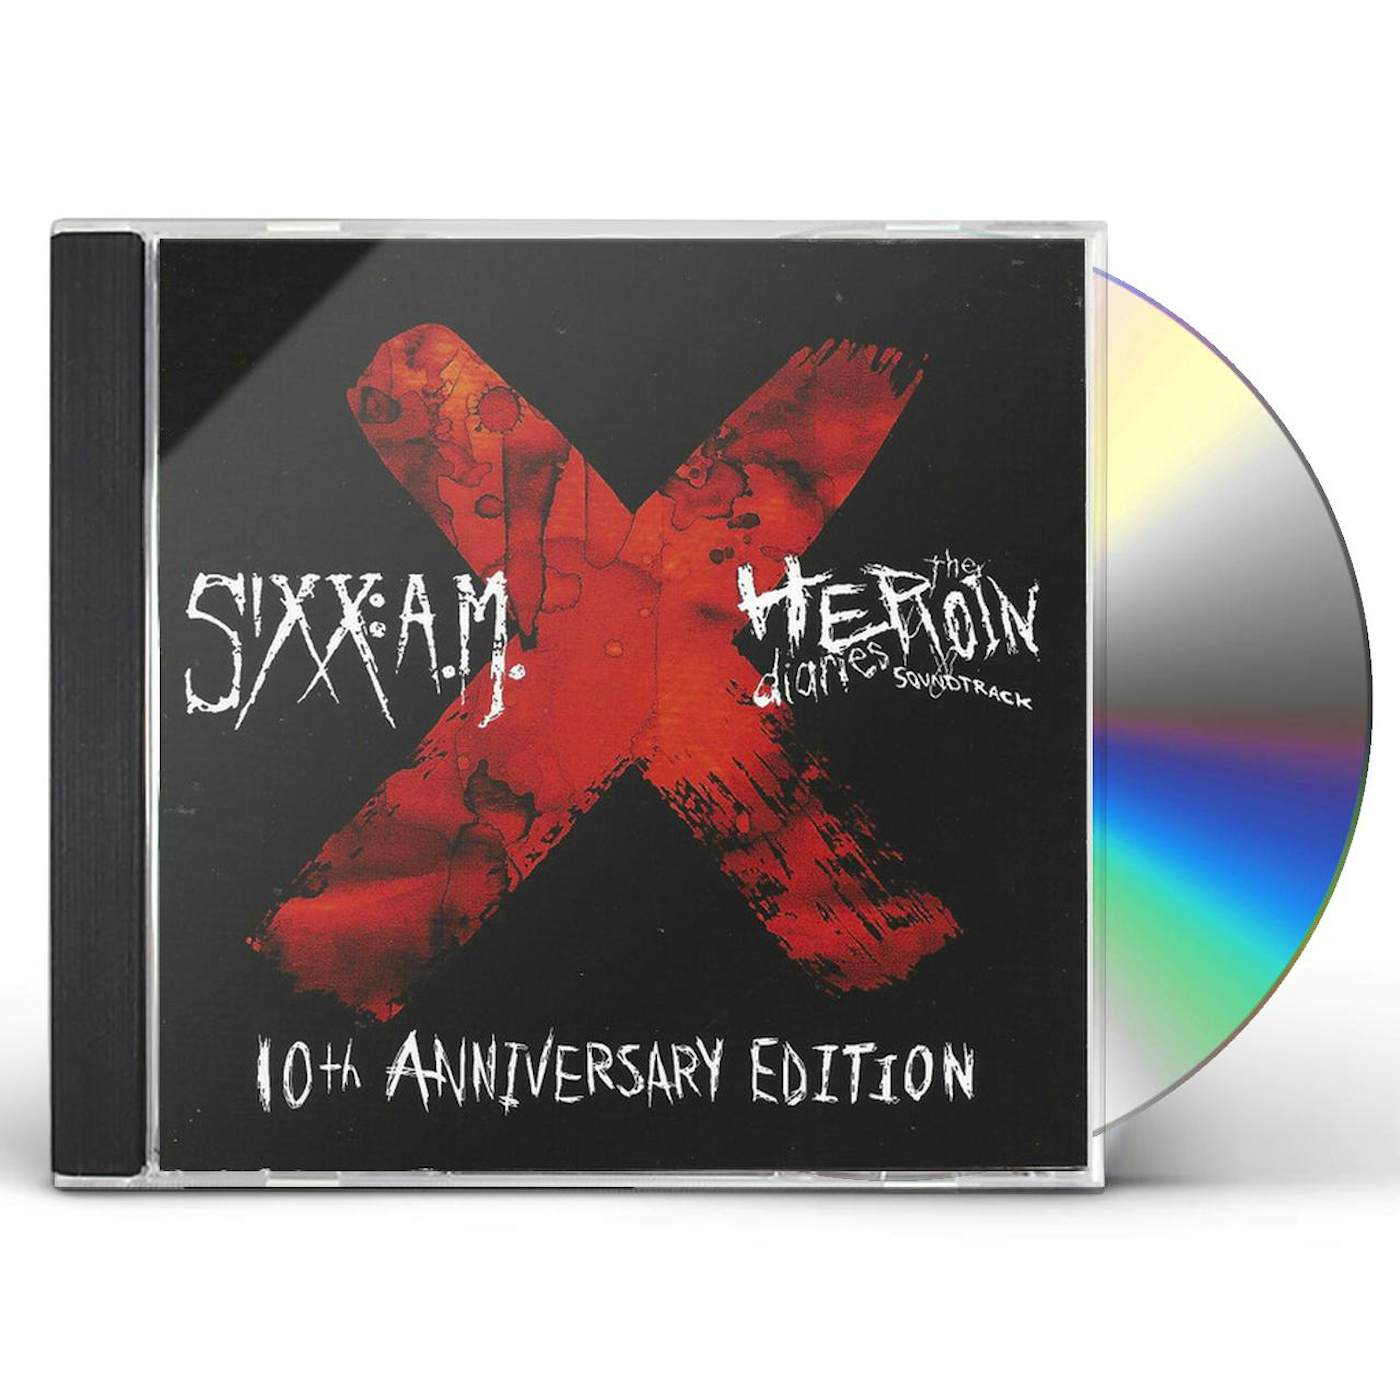 Sixx:A.M. HEROIN DIARIES SOUNDTRACK: 10TH ANNIVERSARY EDITION CD